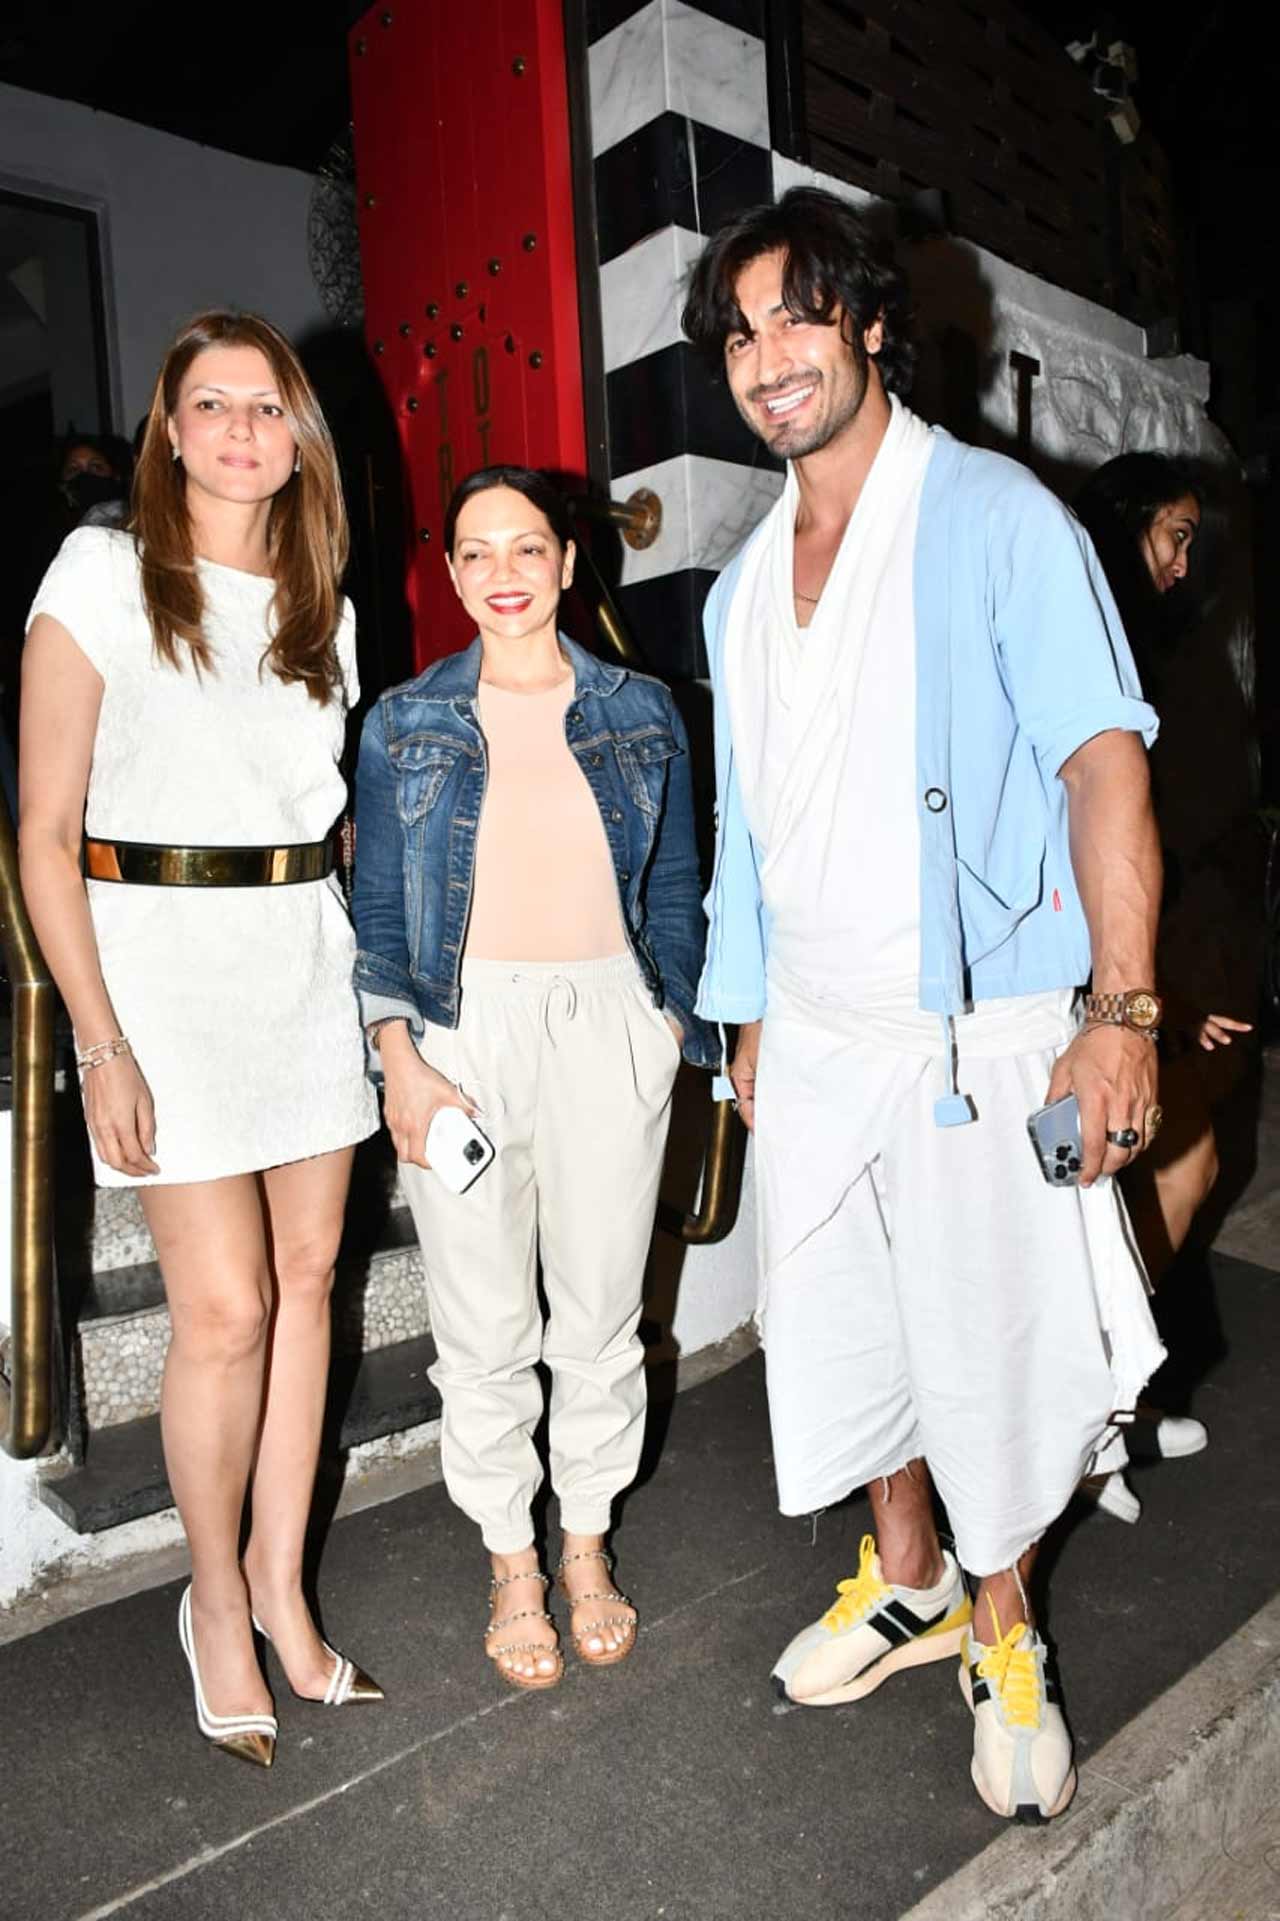 Nandita Mahtani and Vidyut Jammwal were seen together at a dinner outing with their friend Deanne Pandey at a popular restaurant in Bandra, Mumbai. Nandita was seen wearing a white coloured dress, whereas the actor showed off his quirky side in a blue shirt, paired with white tee and funky pants.